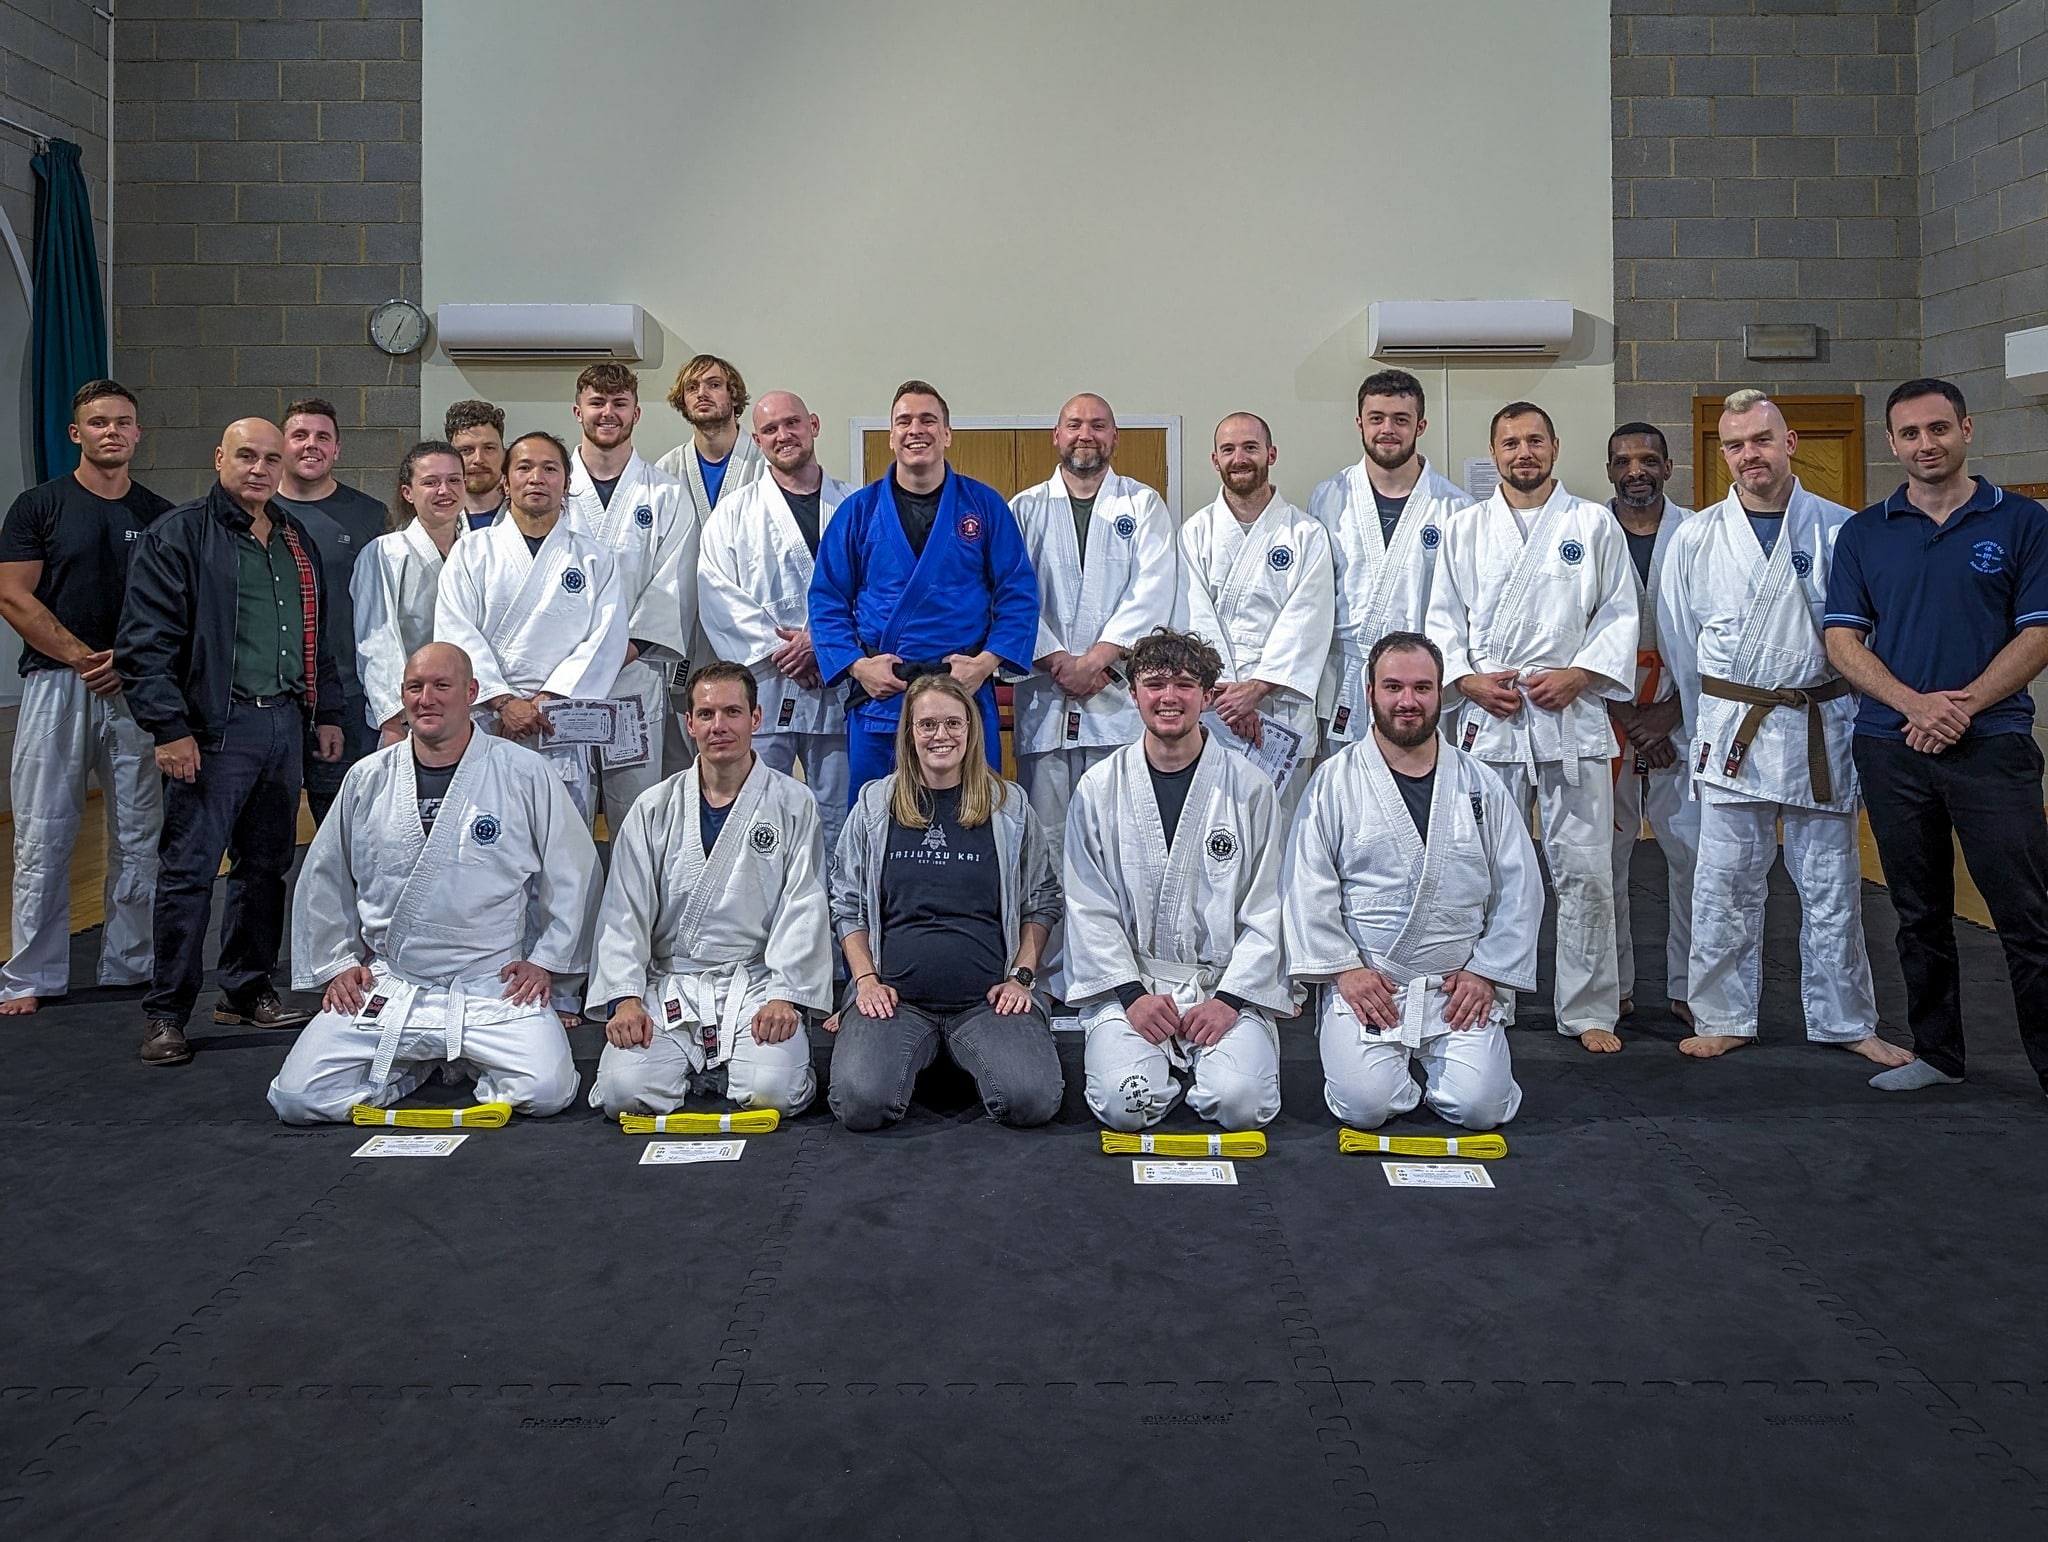 Jujutsu, mixed martial arts and self-defence classes in Tewkesbury